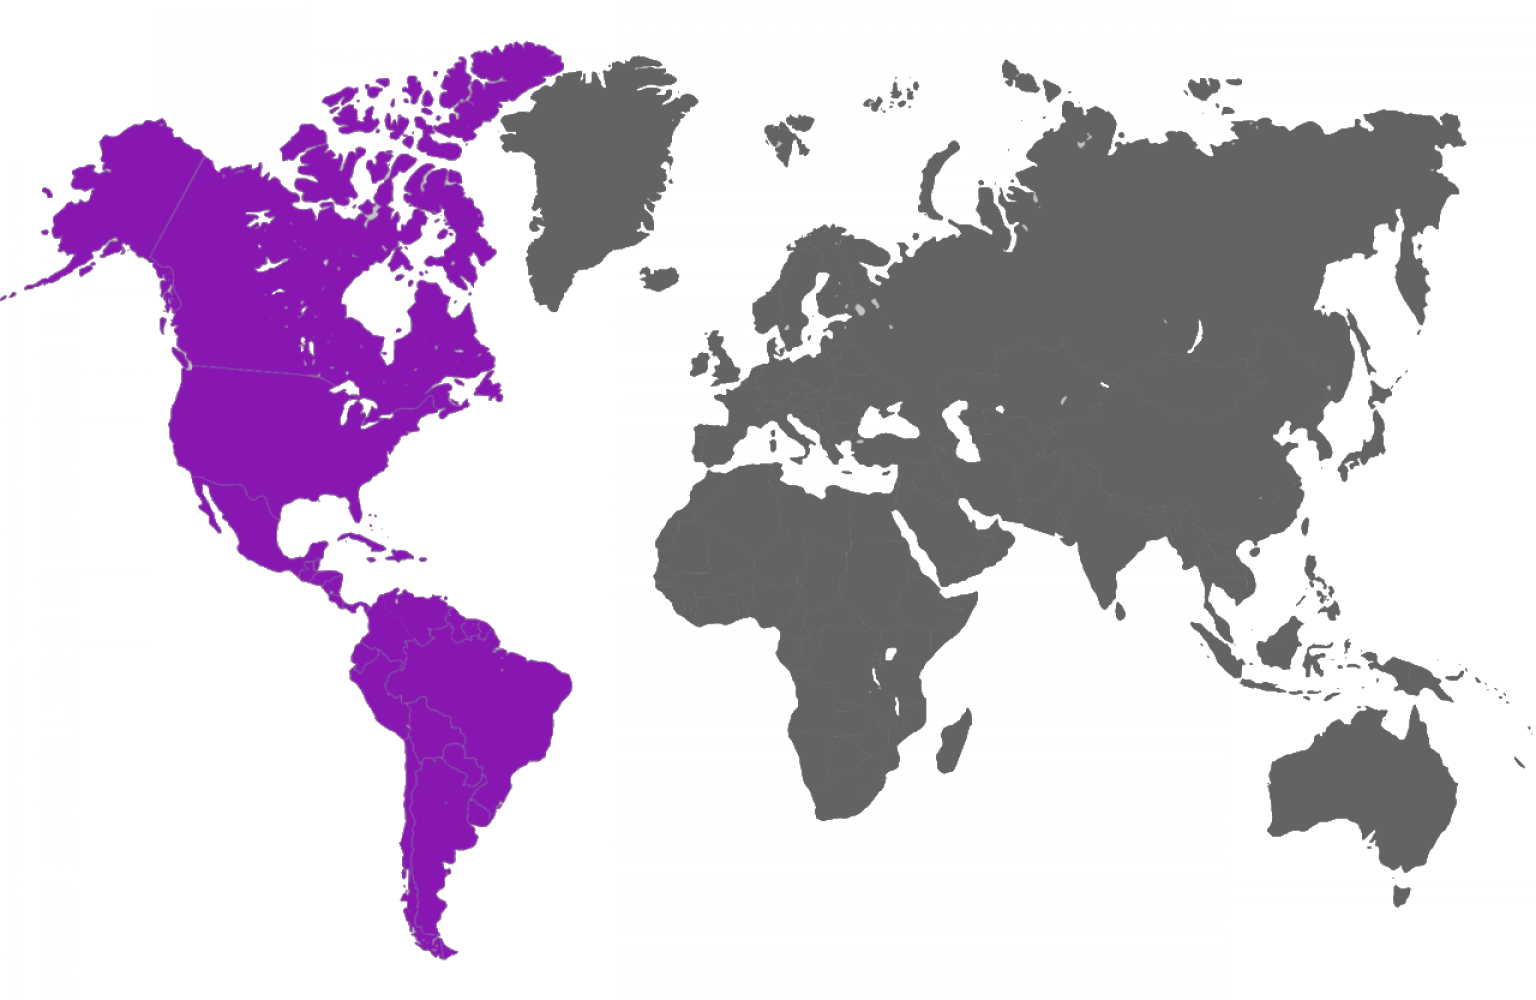 Map Image of Americas Region for i4T Global Licence Holders